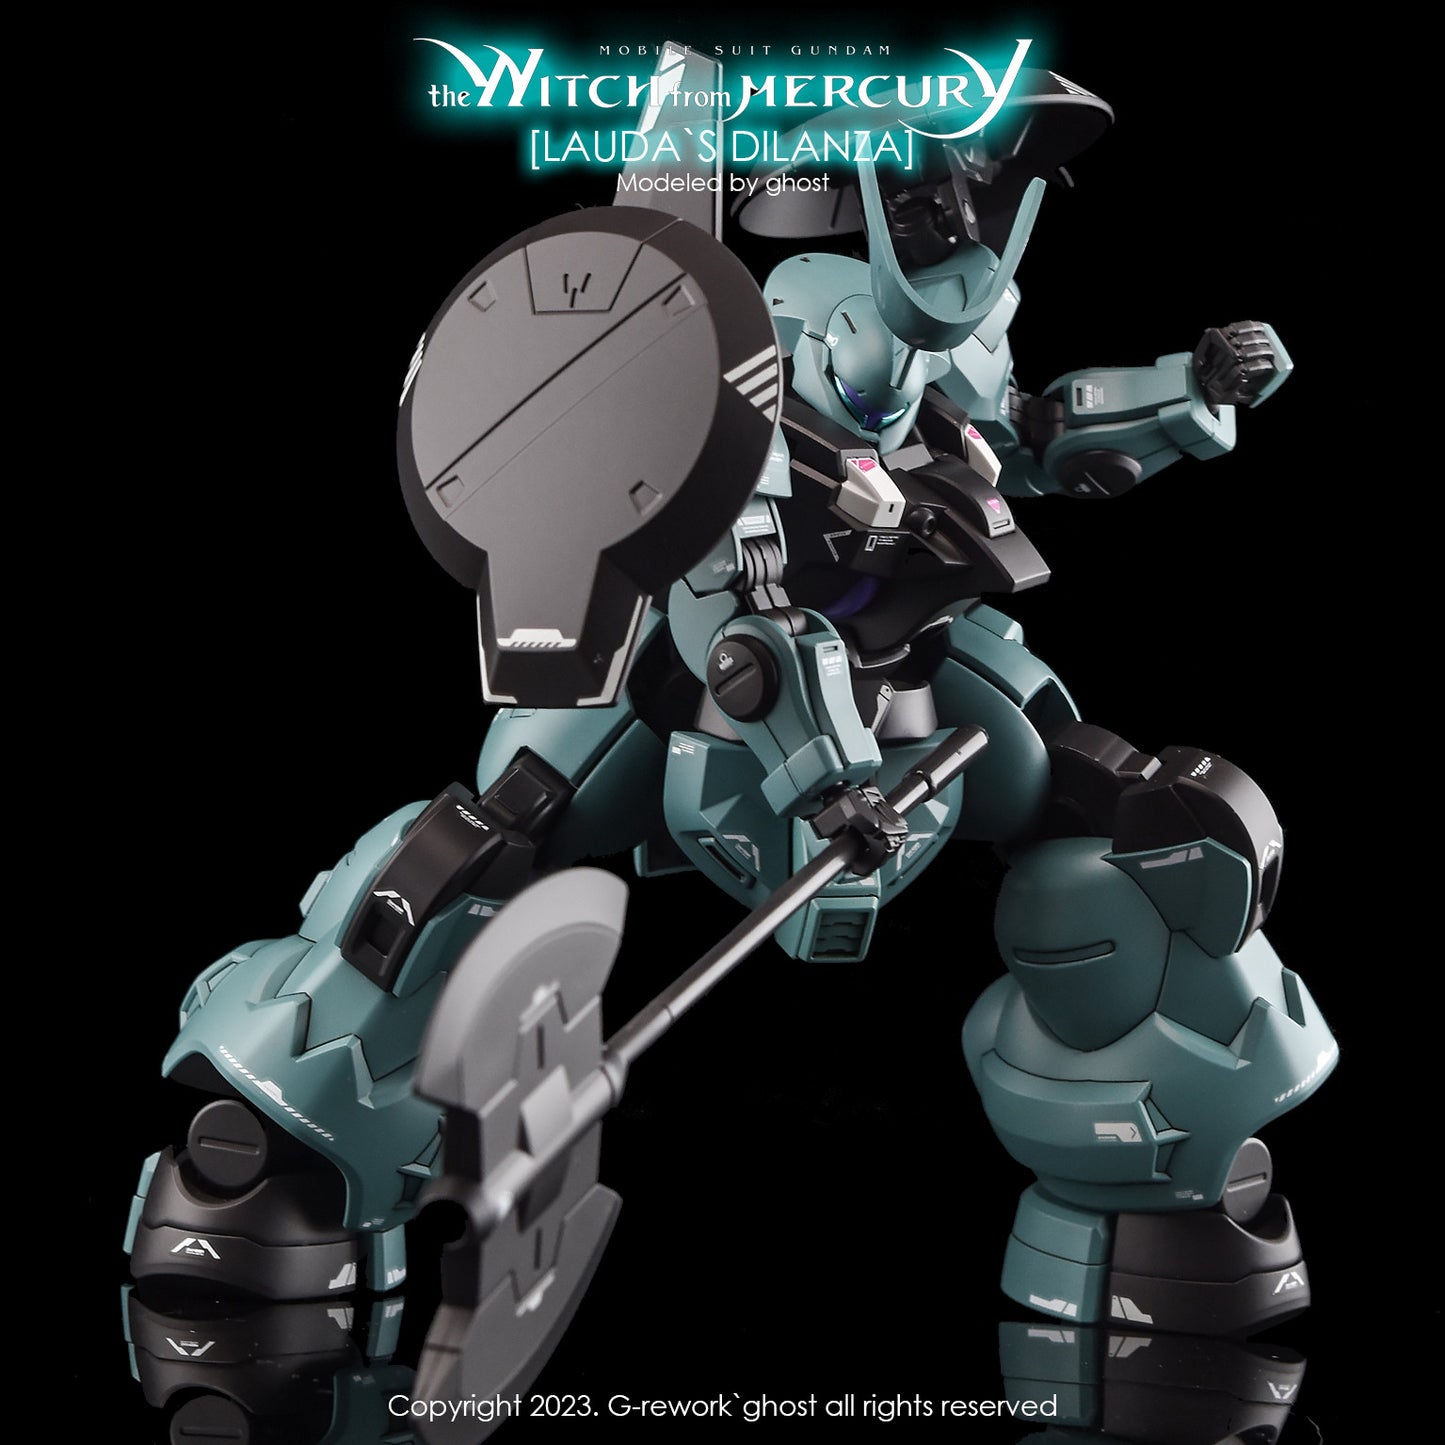 G-Rework [HG] Lauda's Dilanza / witch from mercury (water decal)